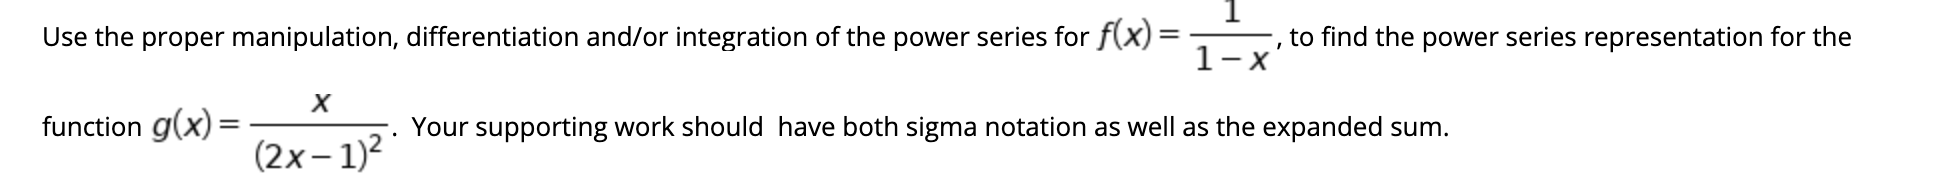 Use the proper manipulation, differentiation and/or integration of the power series for f(x)
to find the power series representation for the
X.
х
function g(x):
Your supporting work should have both sigma notation as well as the expanded sum.
(2x– 1)?
